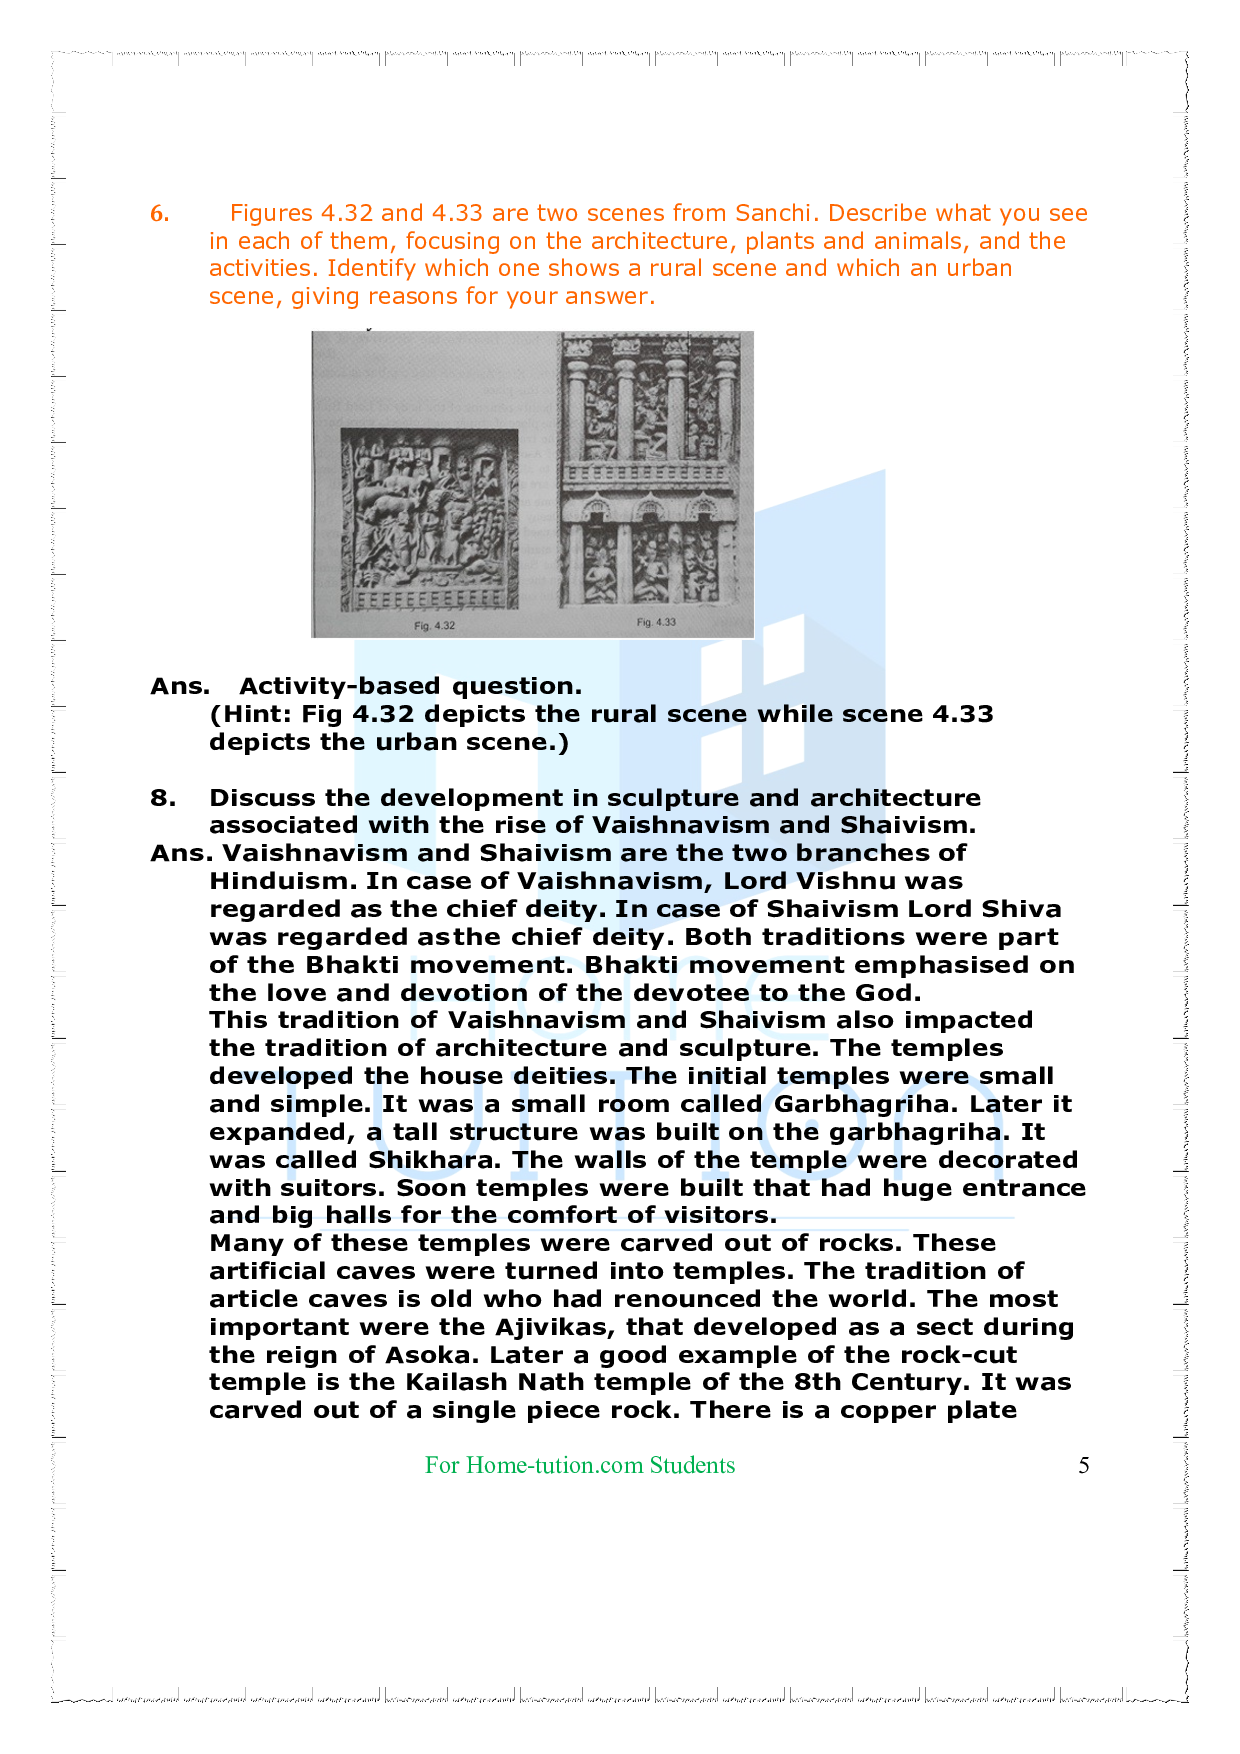 NCERT Solutions Chapter 4 Thinkers, Beliefs and buildings cultural developments